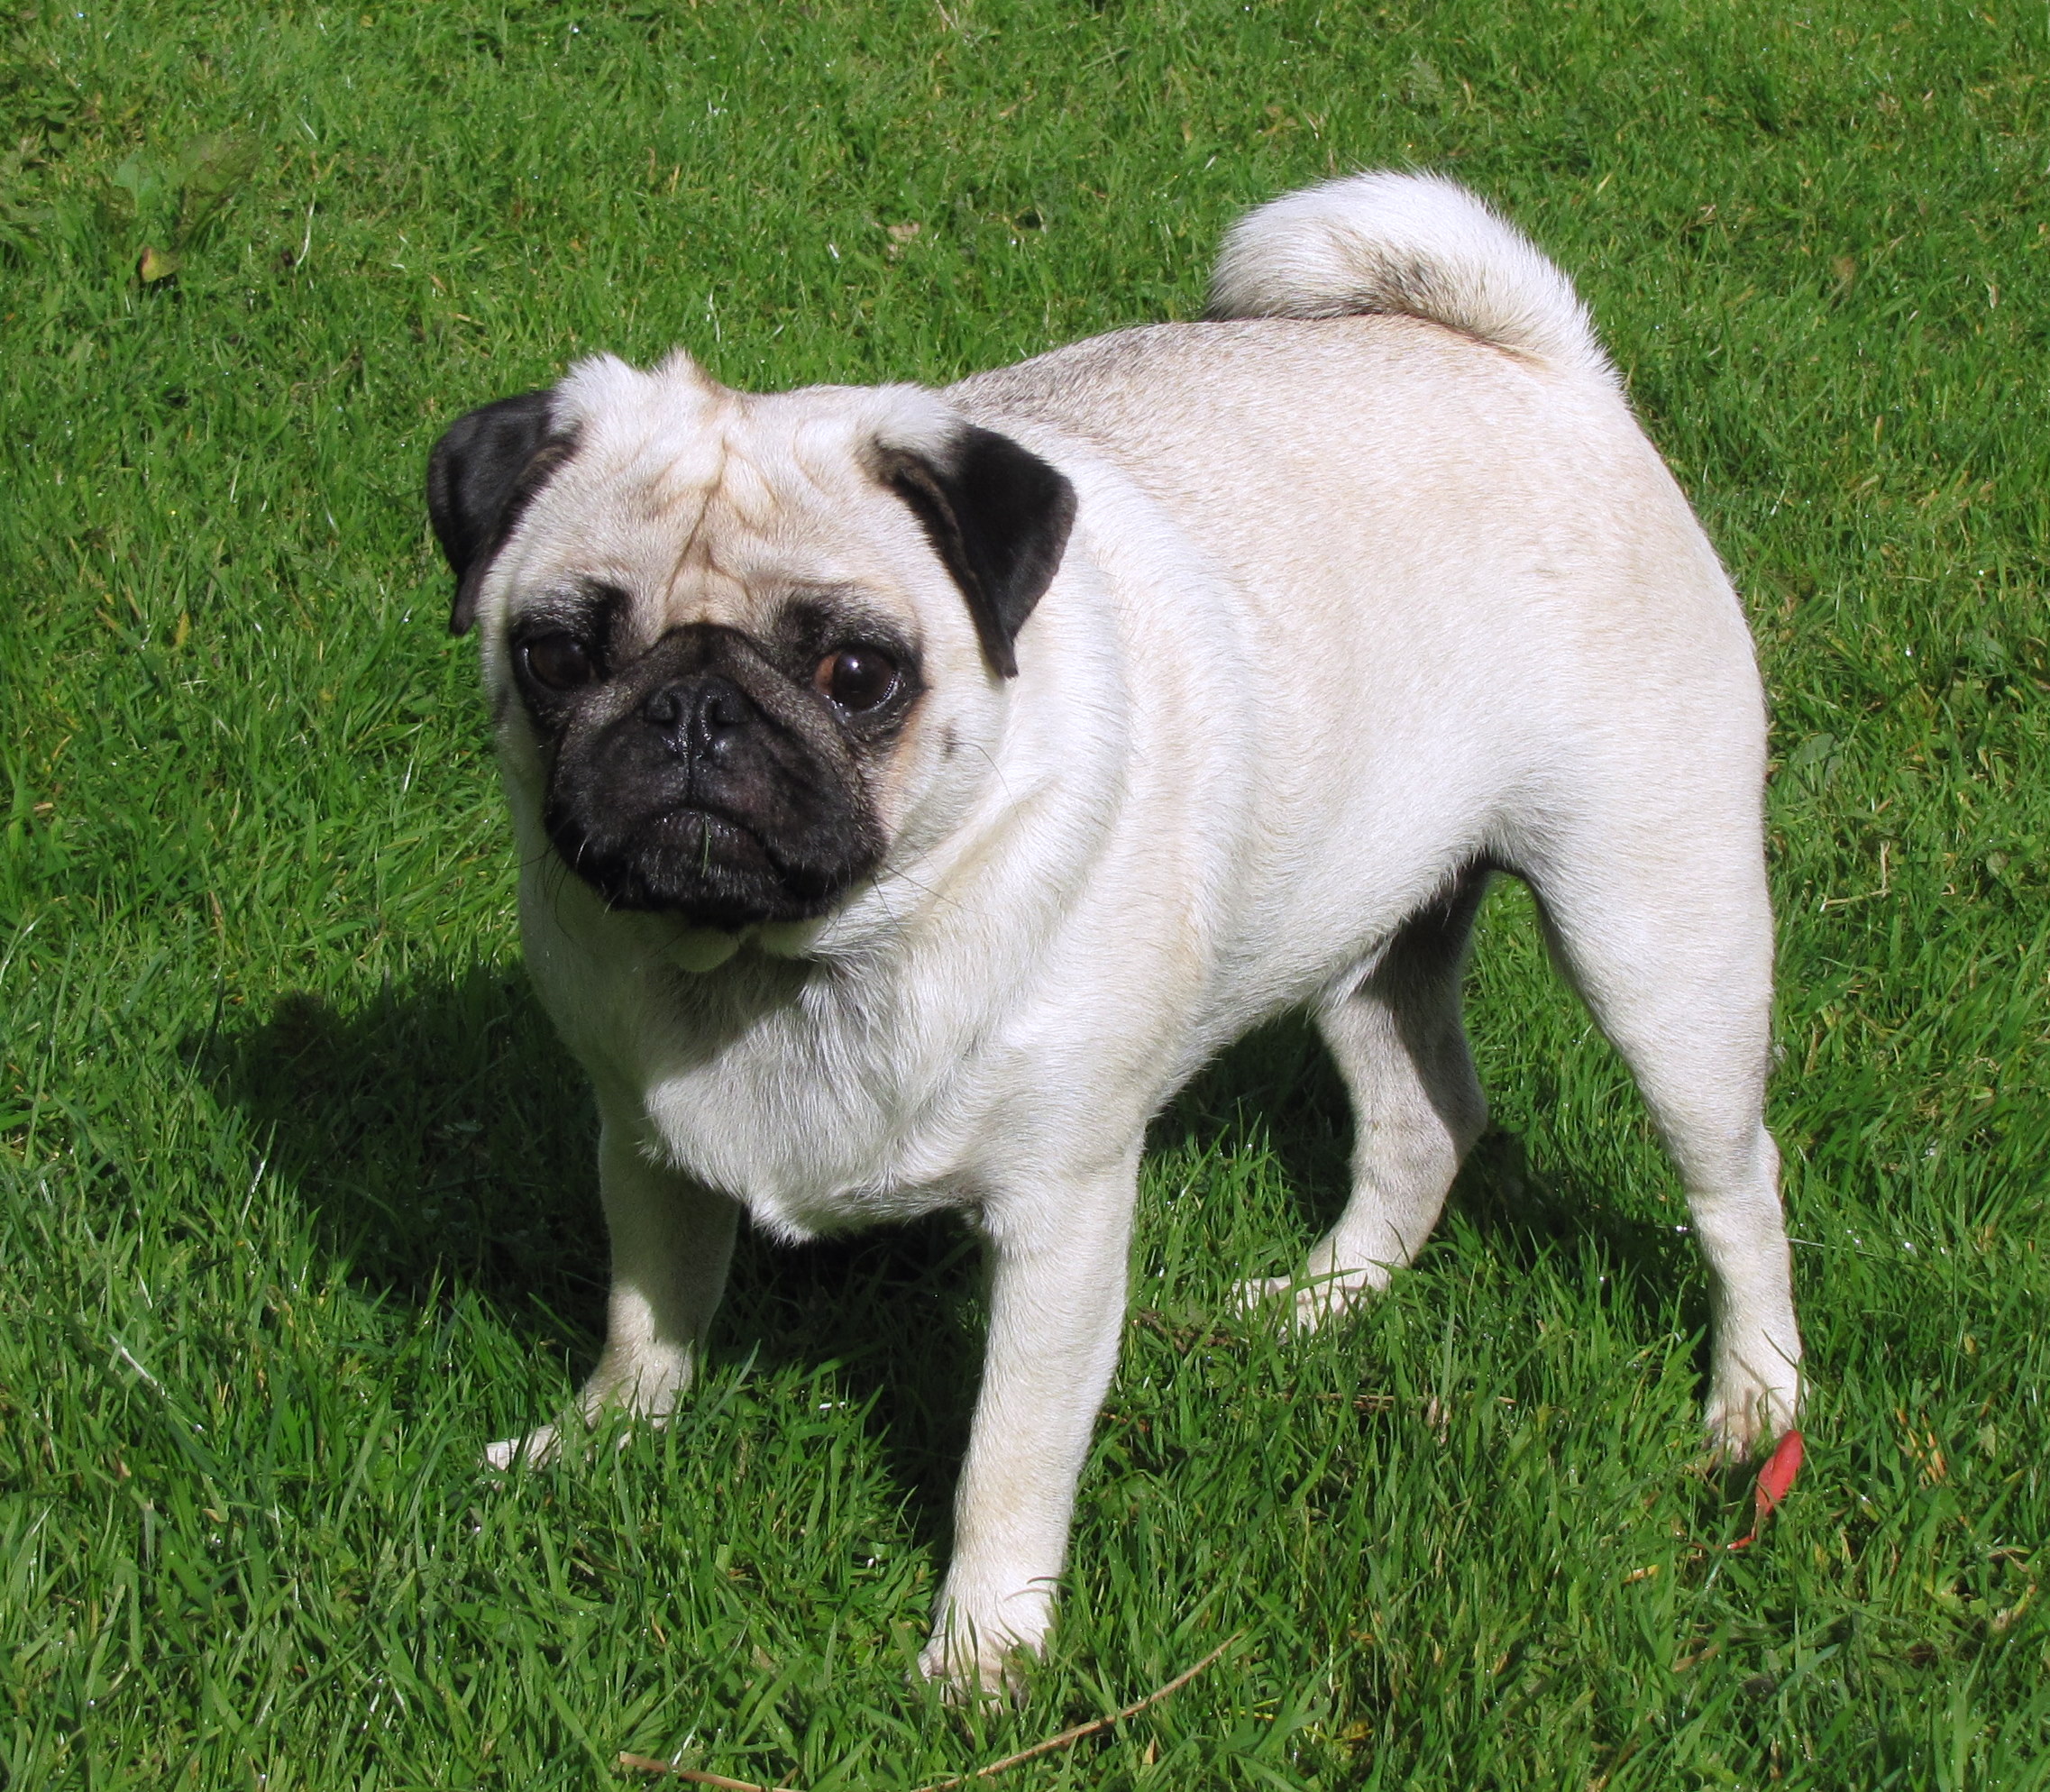 2 Year Old Fawn Pug Puppy Standing On Grass